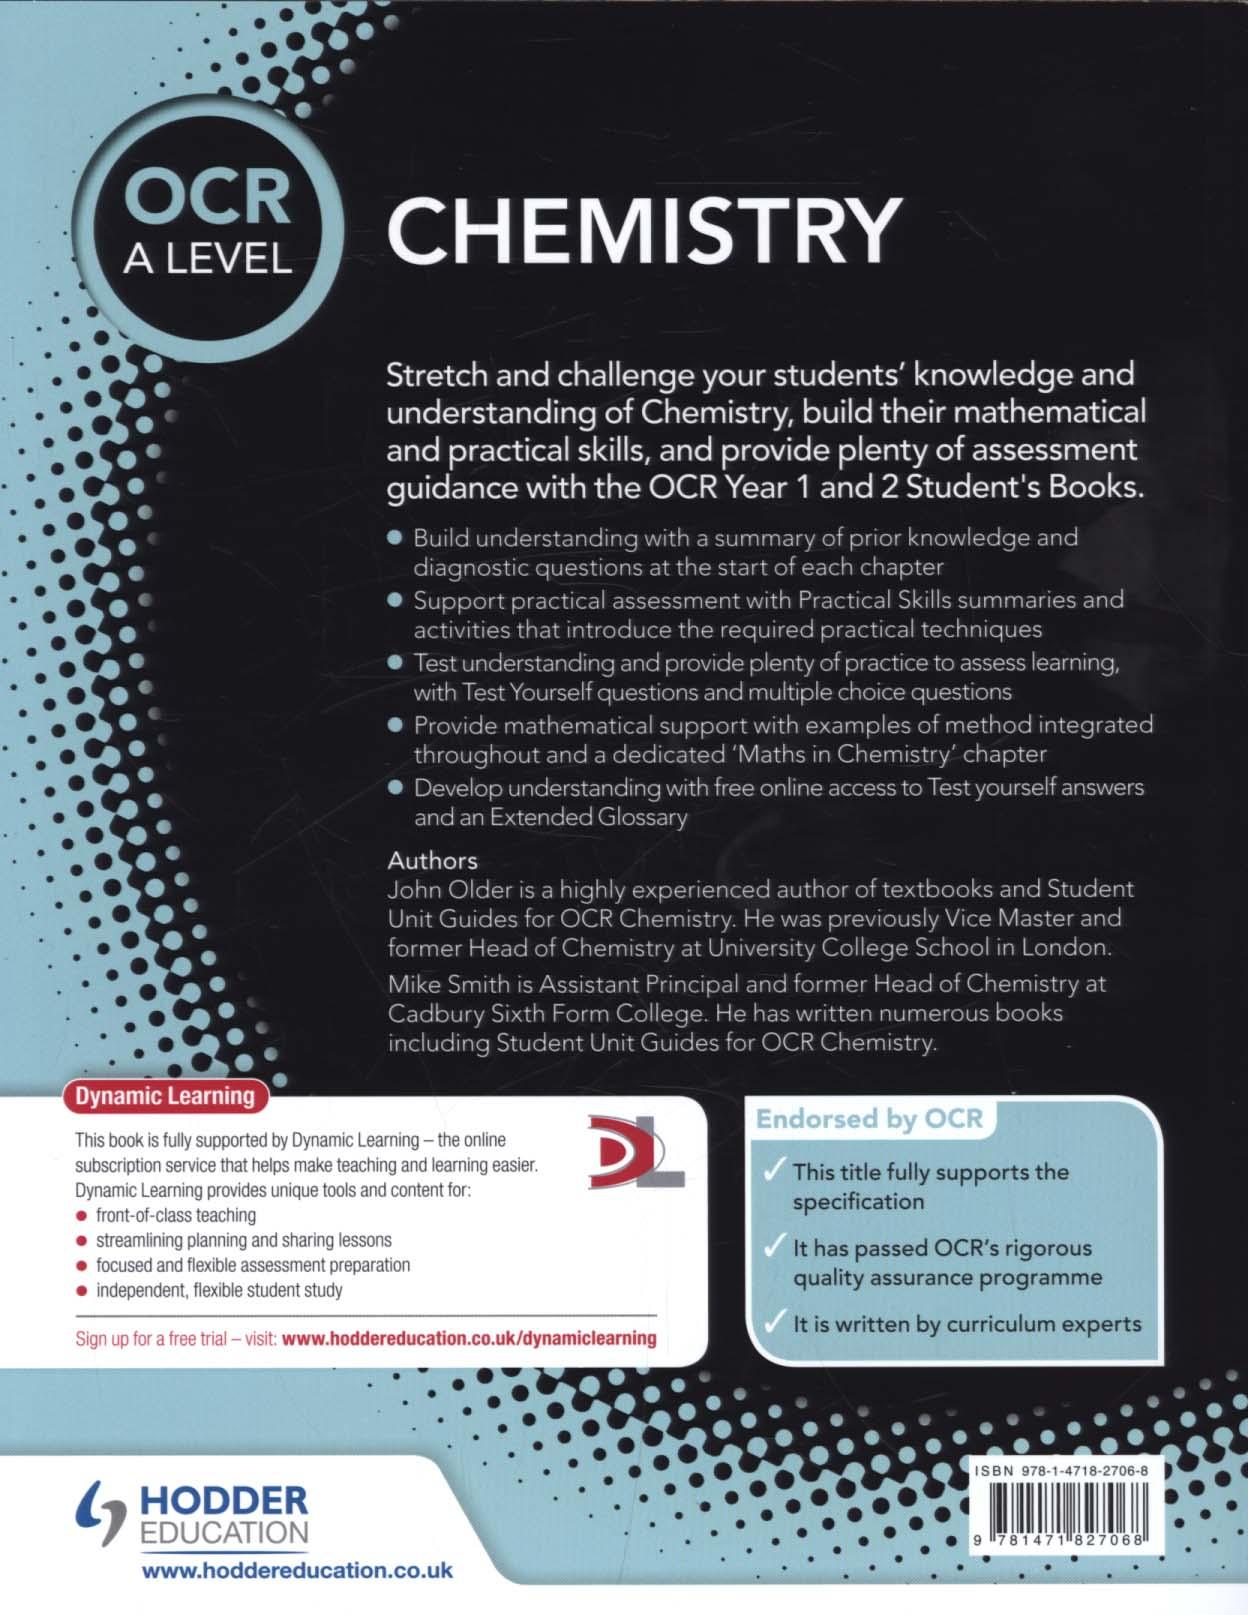 OCR A Level Chemistry Student Book 1